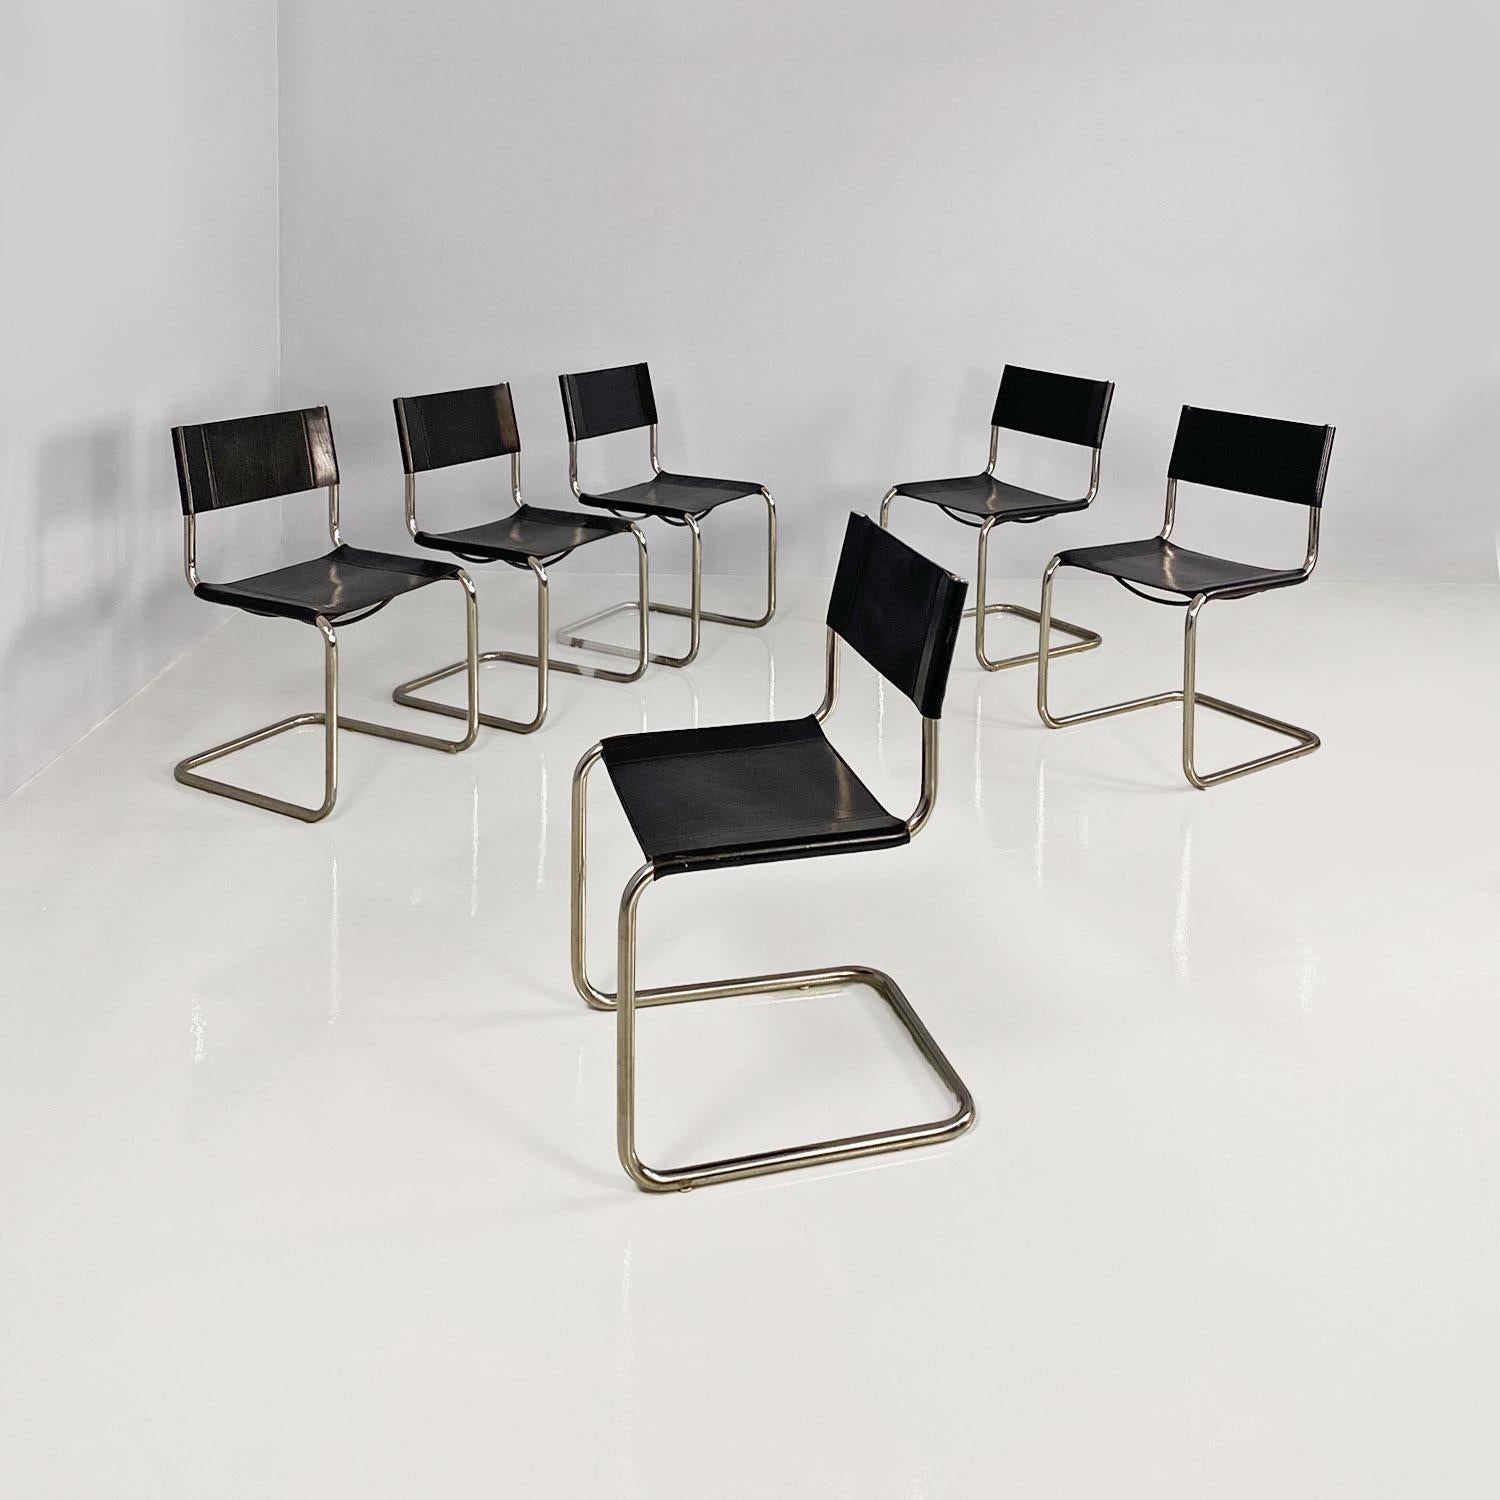 Italian modern black leather and tubolar chromed metal chairs by Zanotta, 1970s.
Set composed of six chairs with chromed metal tubular structure and black leather seat and back. Under the seat there are two arched metal supports.
Produced by Zanotta